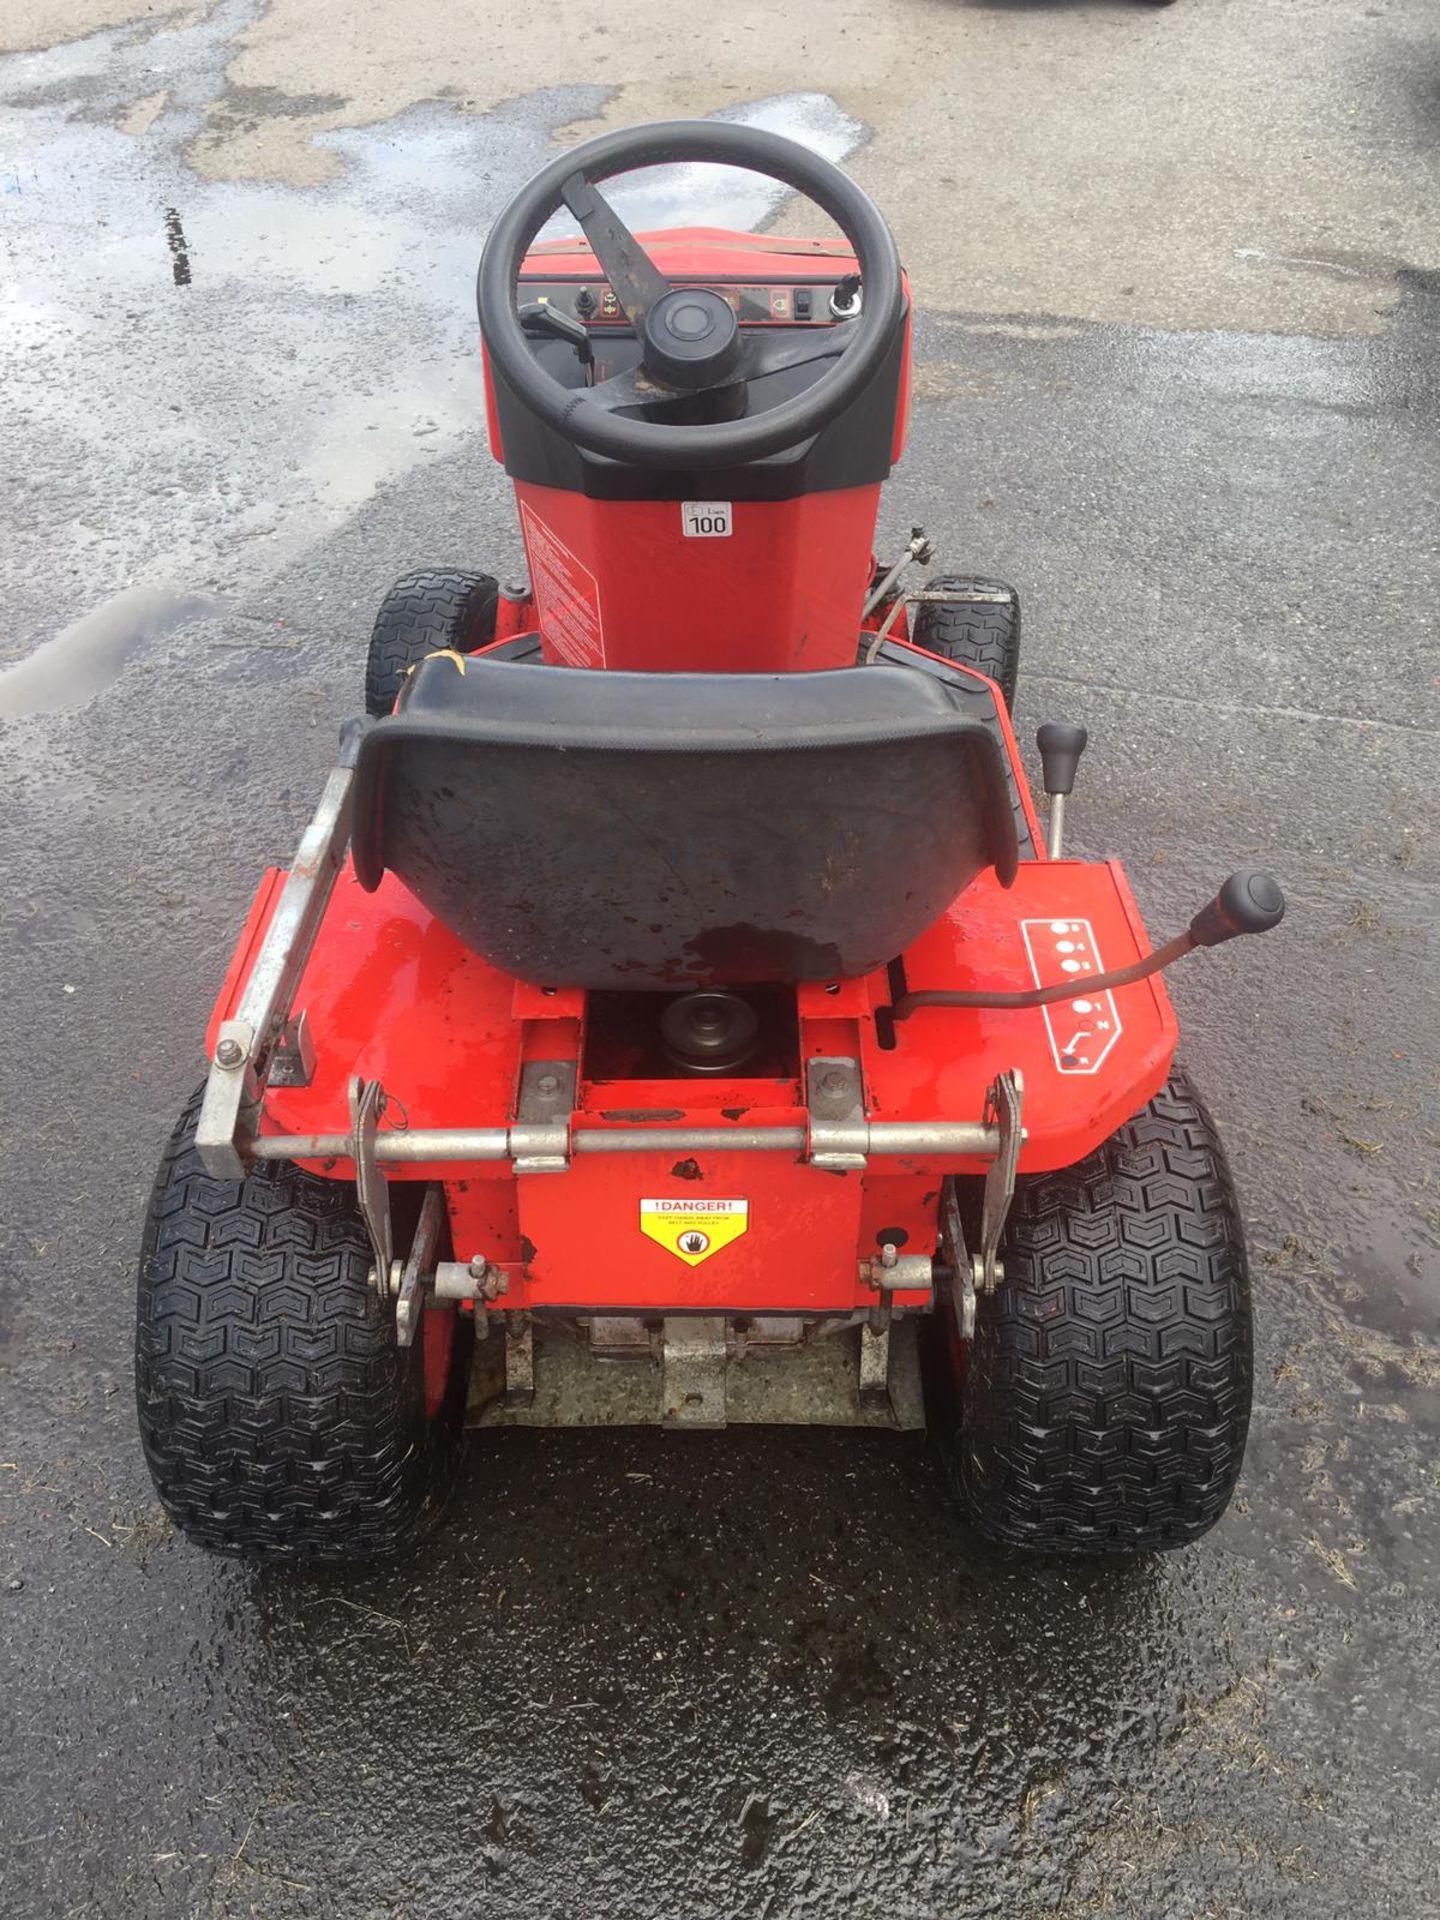 COUNTAX K14 RIDE ON LAWN MOWER, VANGUARD 14HP ENGINE, STARTS, RUNS AND DRIVES *NO VAT* - Image 5 of 12